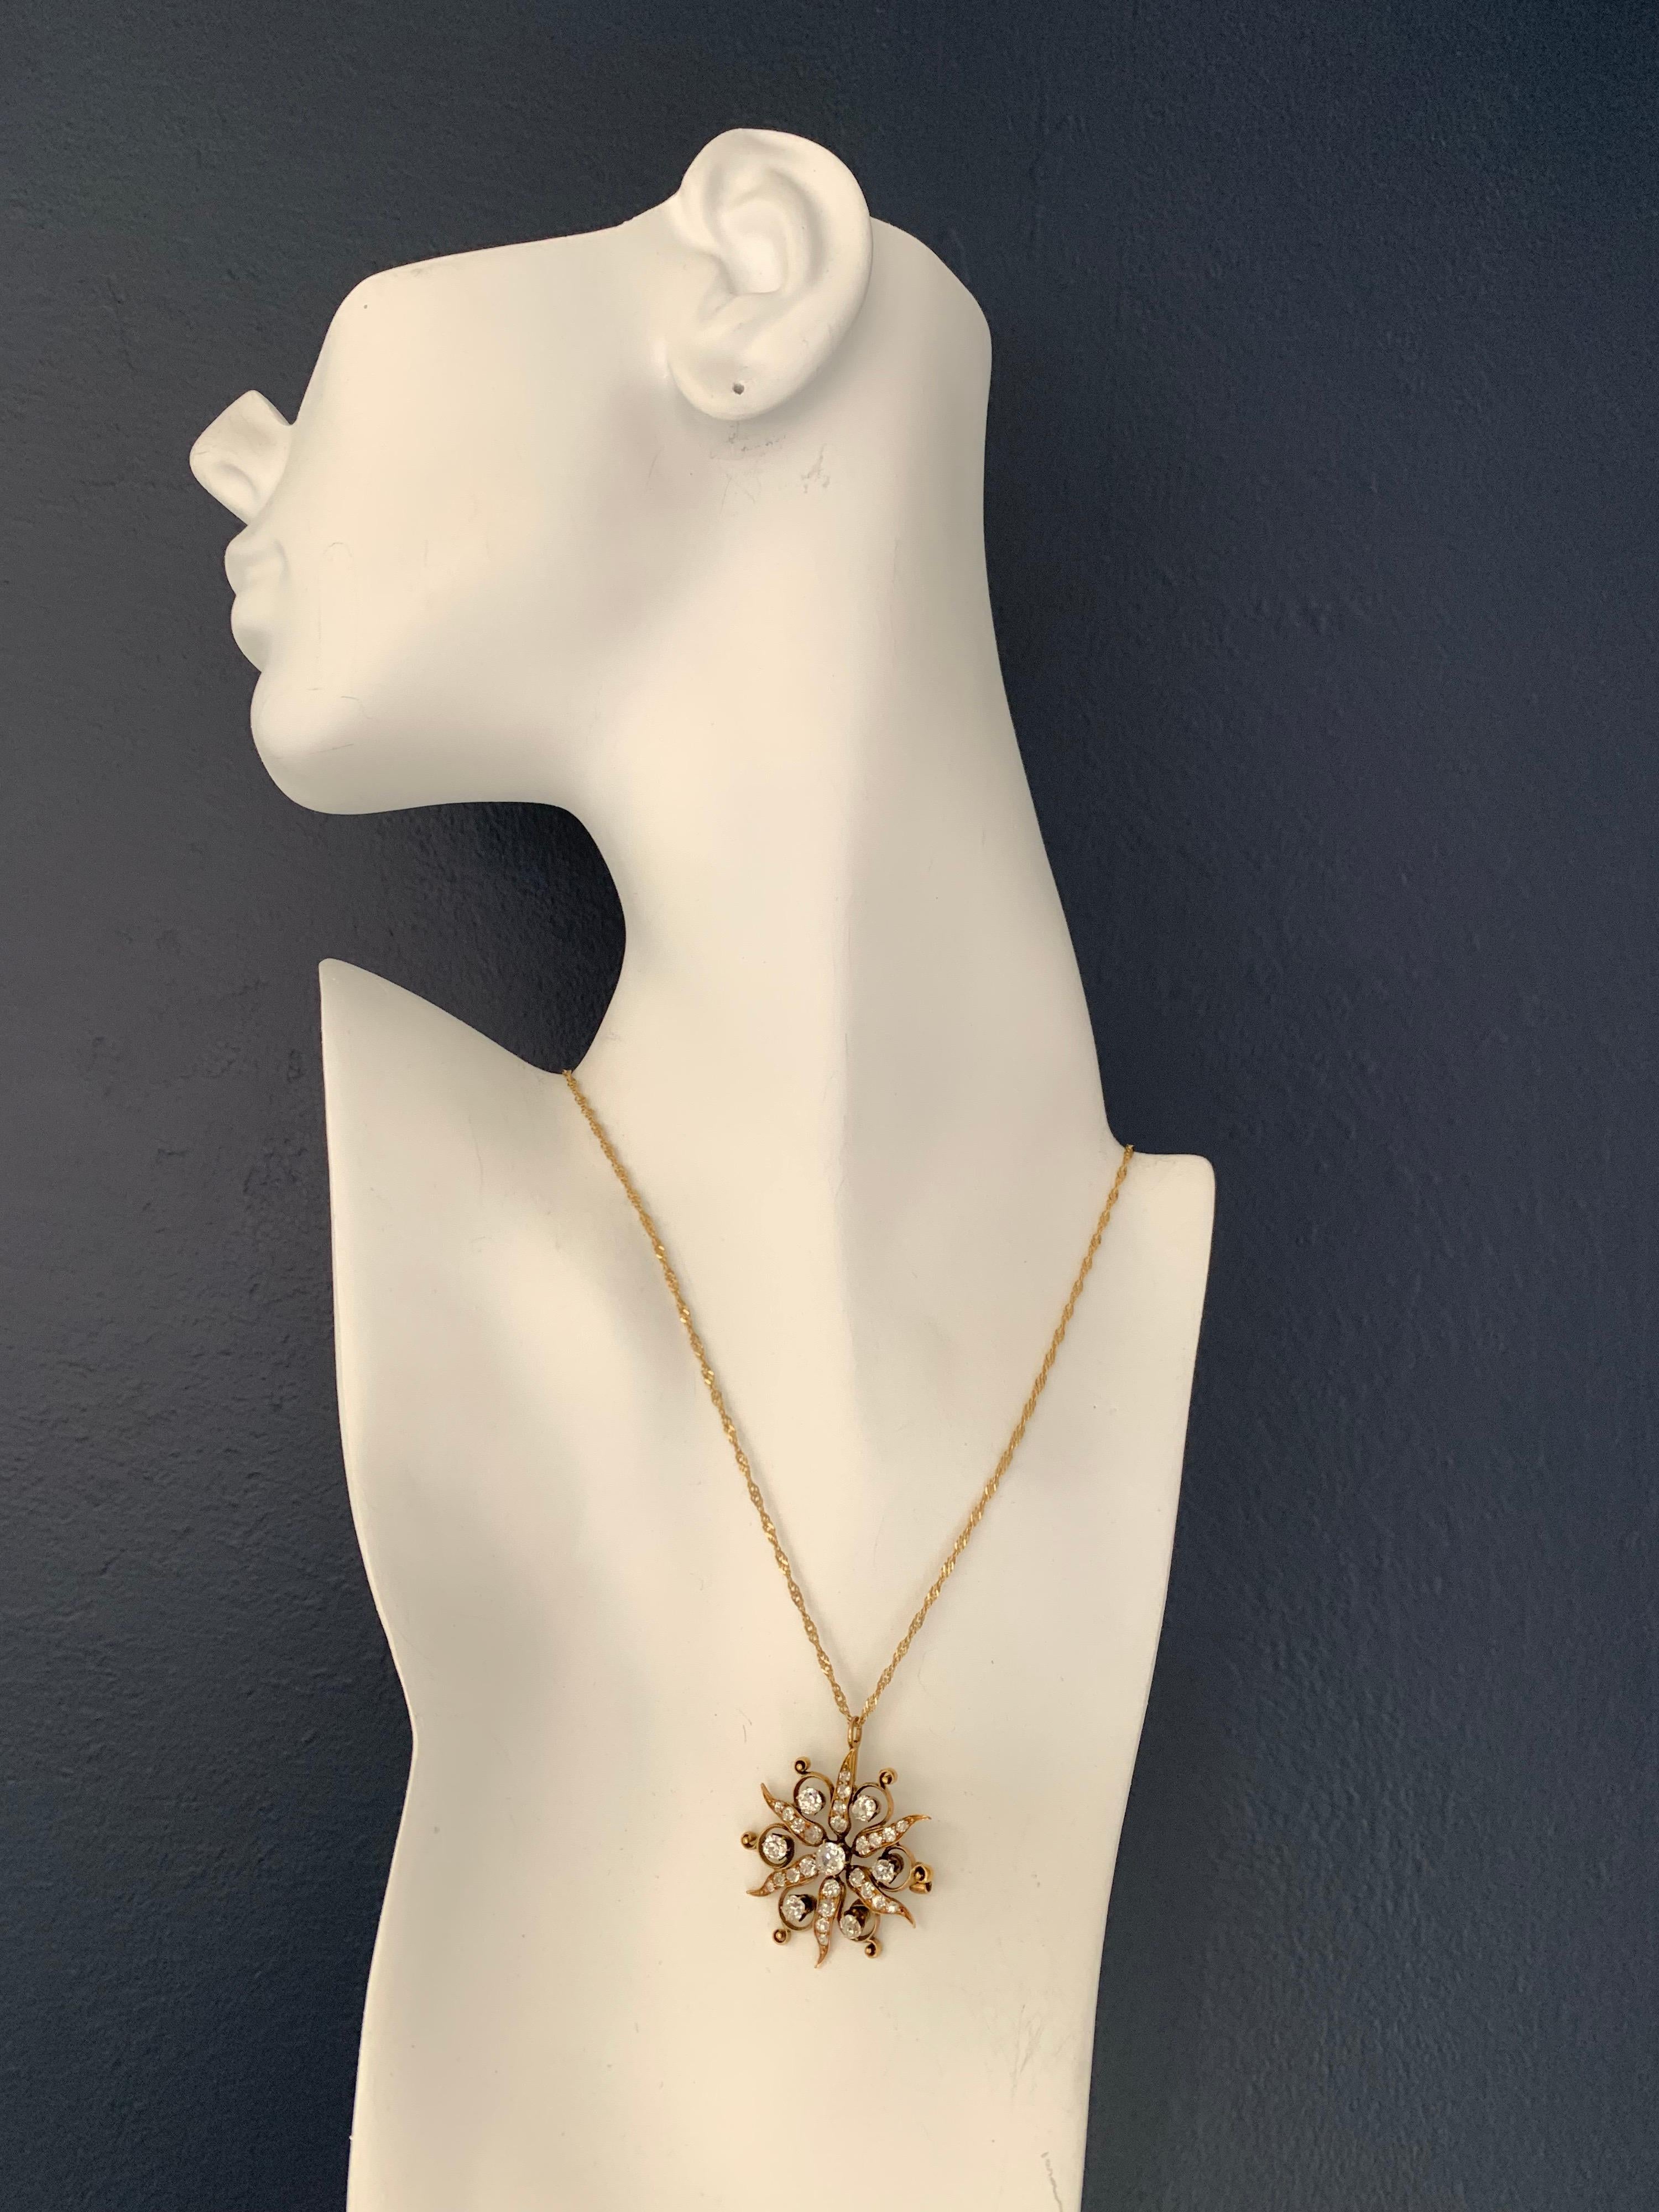 A stunning original gold pendant, set with 31 natural Old European Cut diamonds approximately H-I color and SI clarity. Weight is 7.06 grams without chain, 9.2 grams with chain. The 16